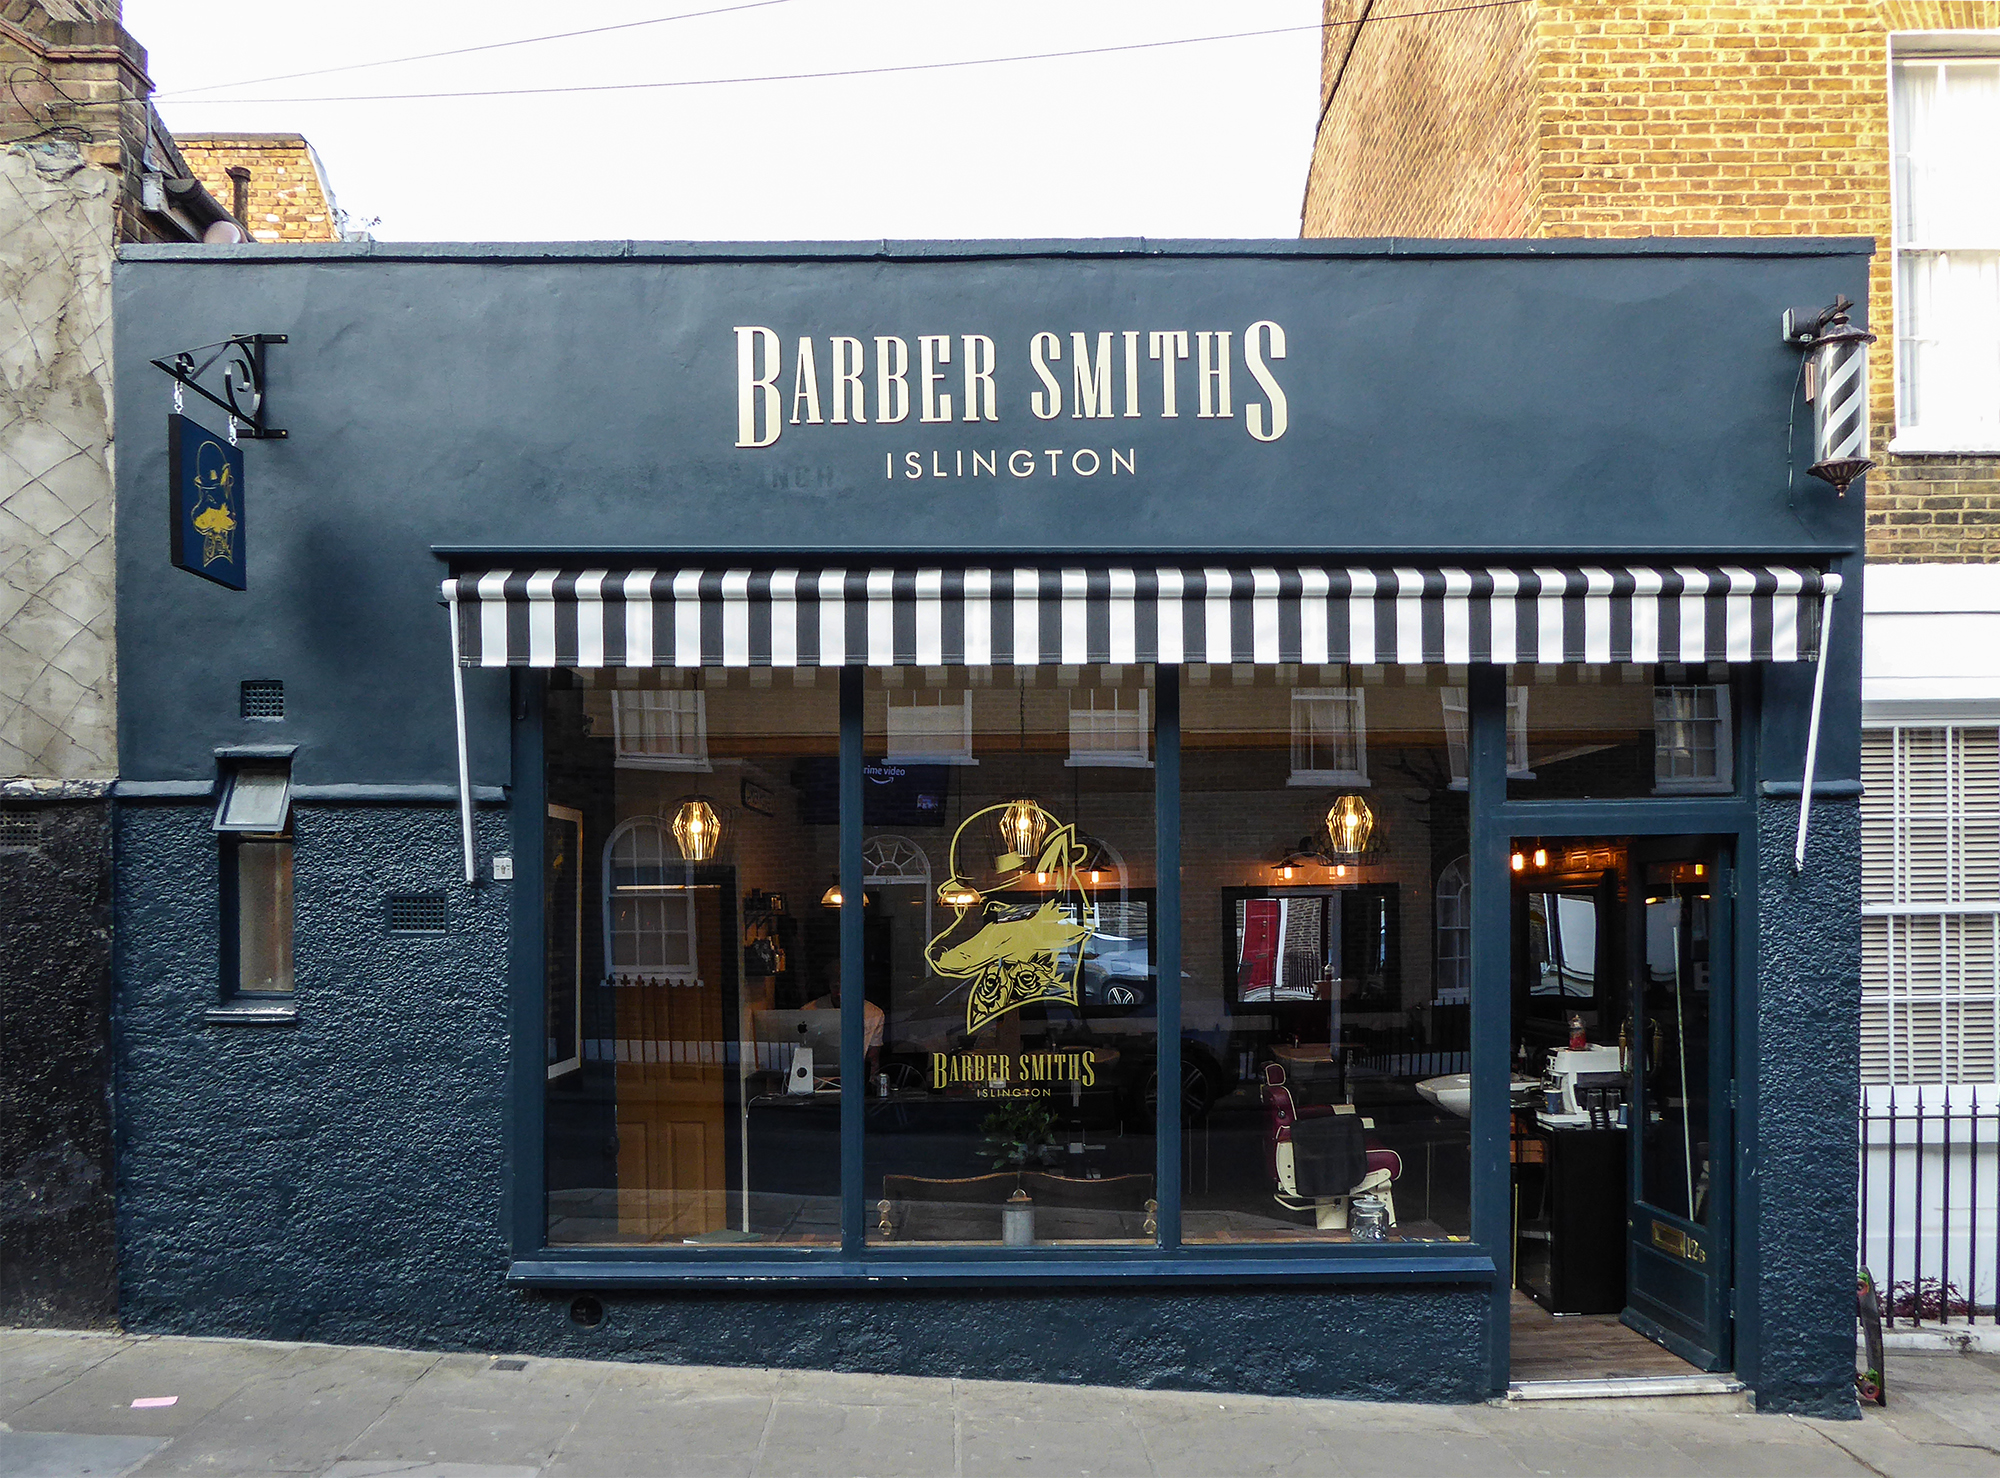 Barber Smith Greenwich awning